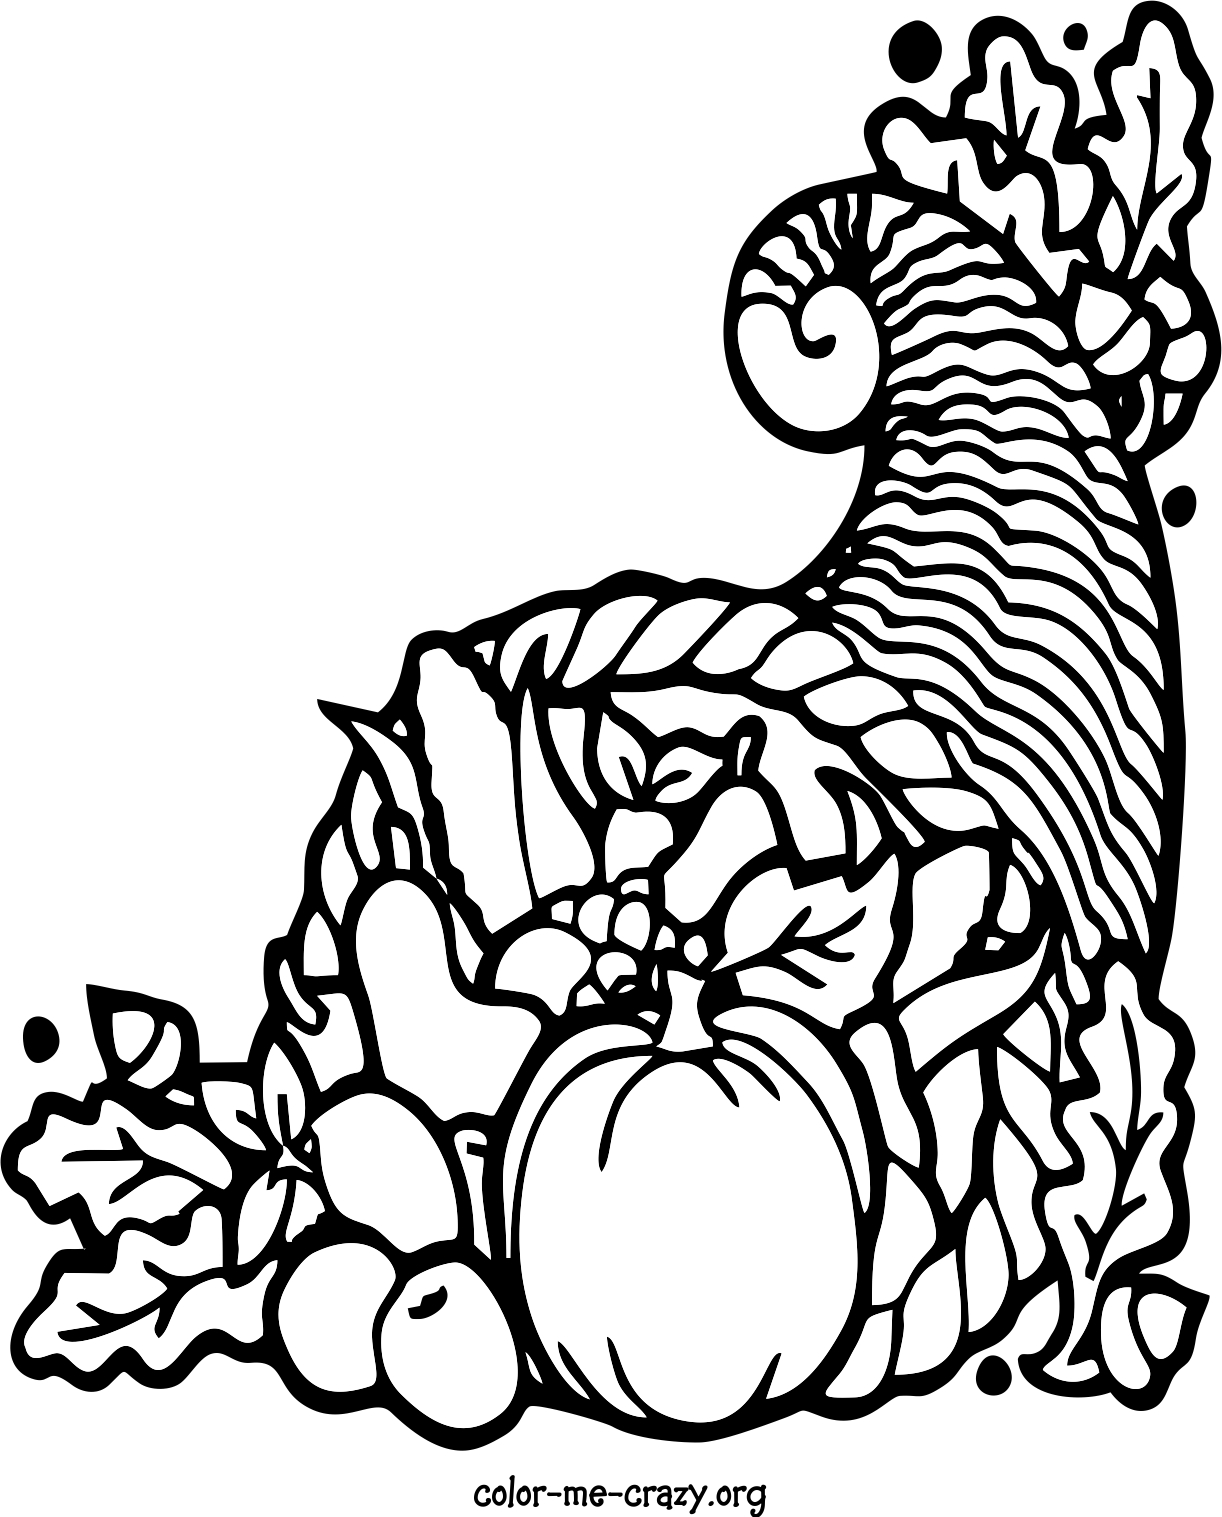 ColorMeCrazy.org: Thanksgiving Coloring Pages